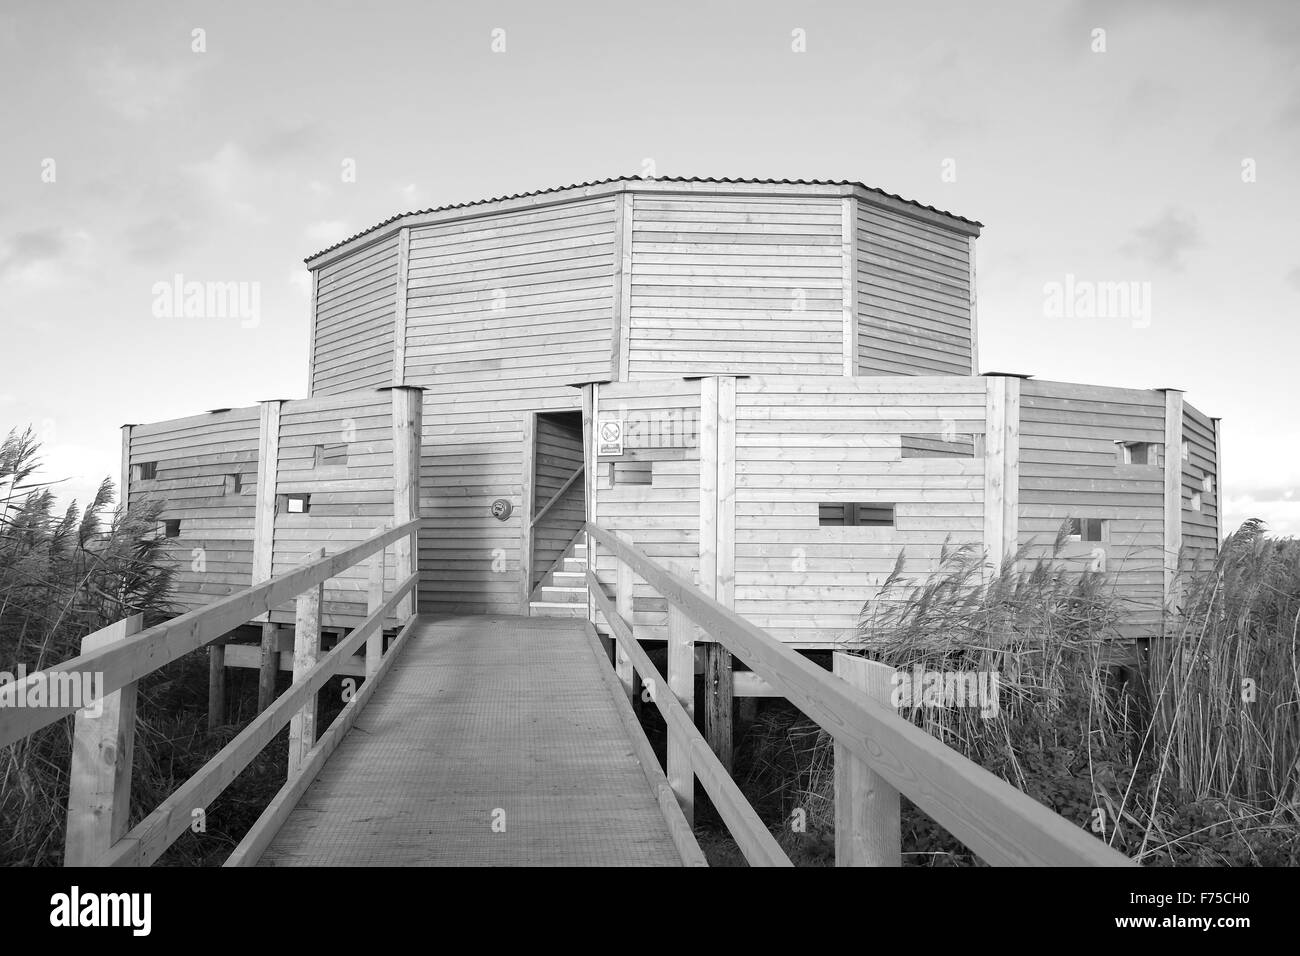 The New (2015) Avalon hide at RSPB Ham Wall Nature reserve Stock Photo